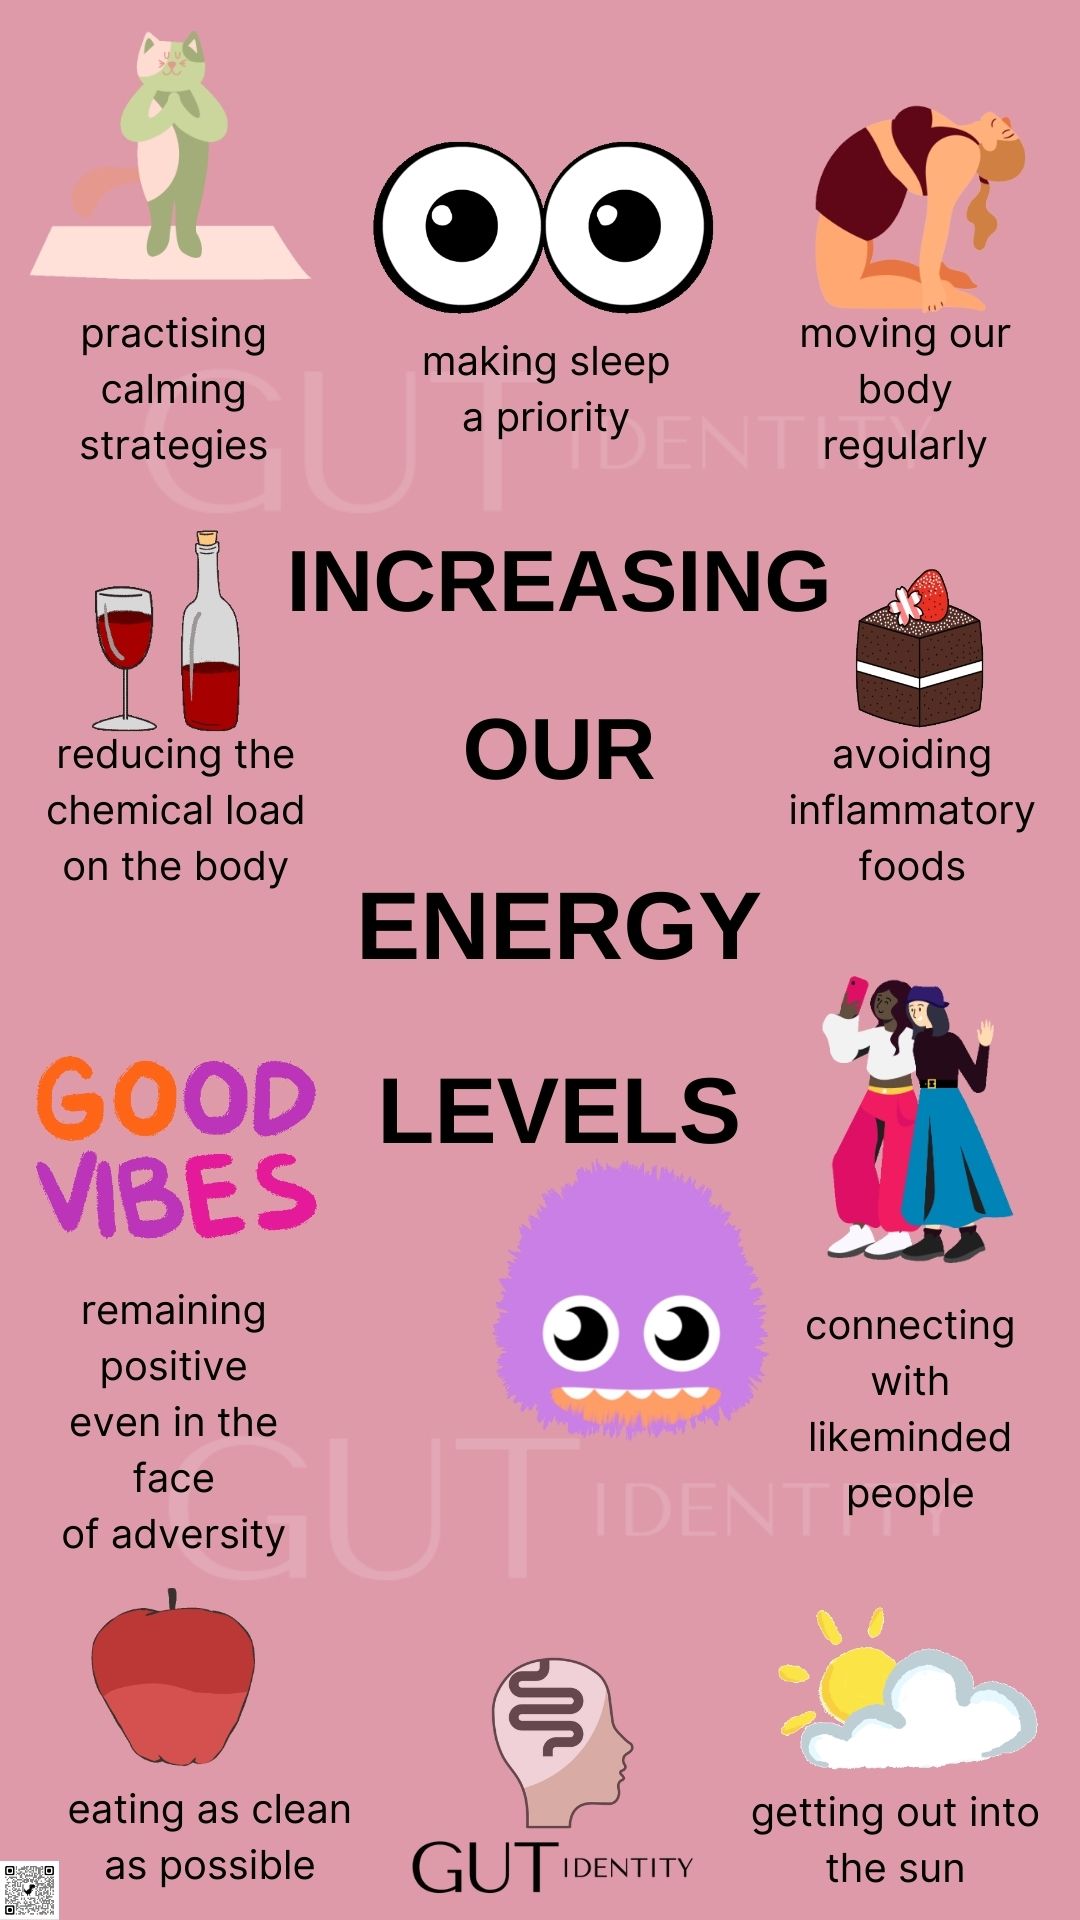 Ways to increase our energy levels